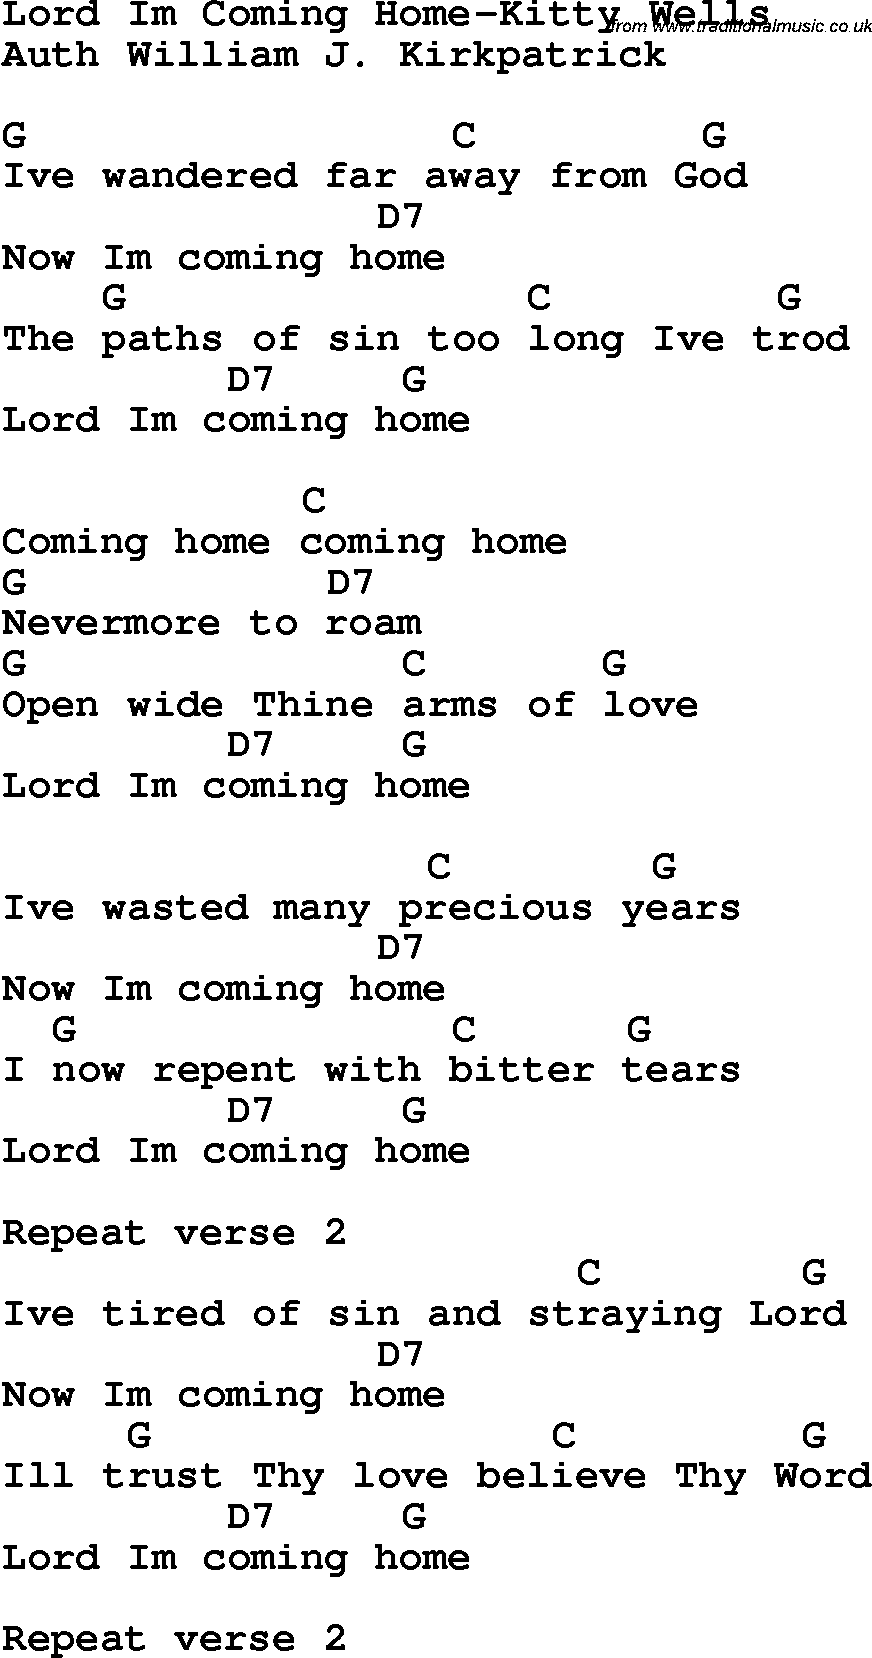 Country, Southern and Bluegrass Gospel Song Lord I’m Coming Home-Kitty Wells lyrics and chords